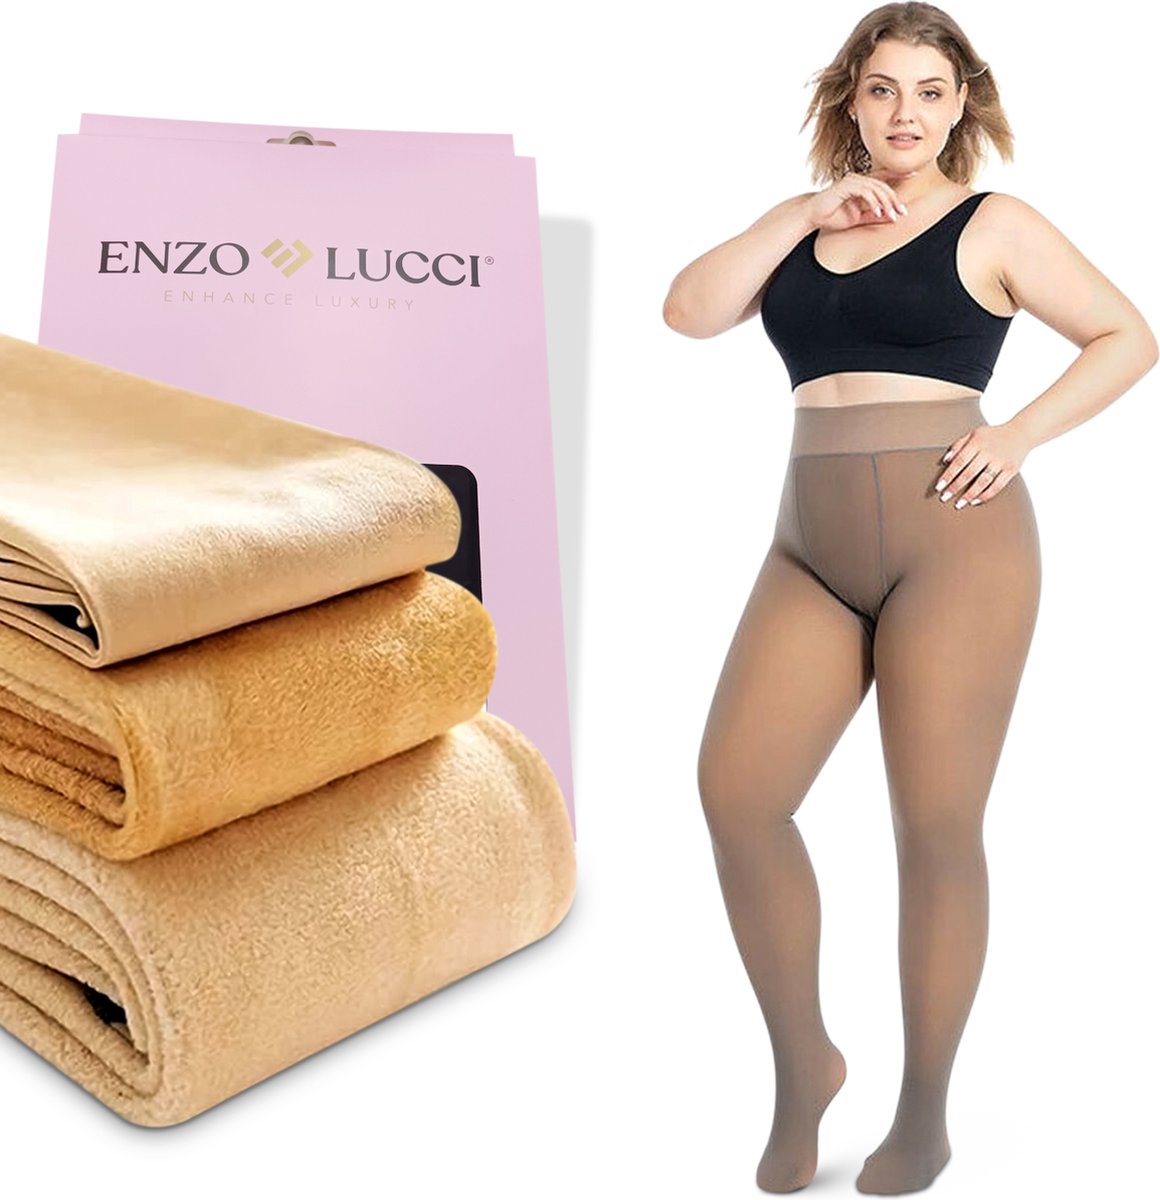 Enzo Lucci Fleece Panty voor Dames - Thermo Legging Panty’s - Plus Size Maillot - Gevoerde panty - Maat L/XL